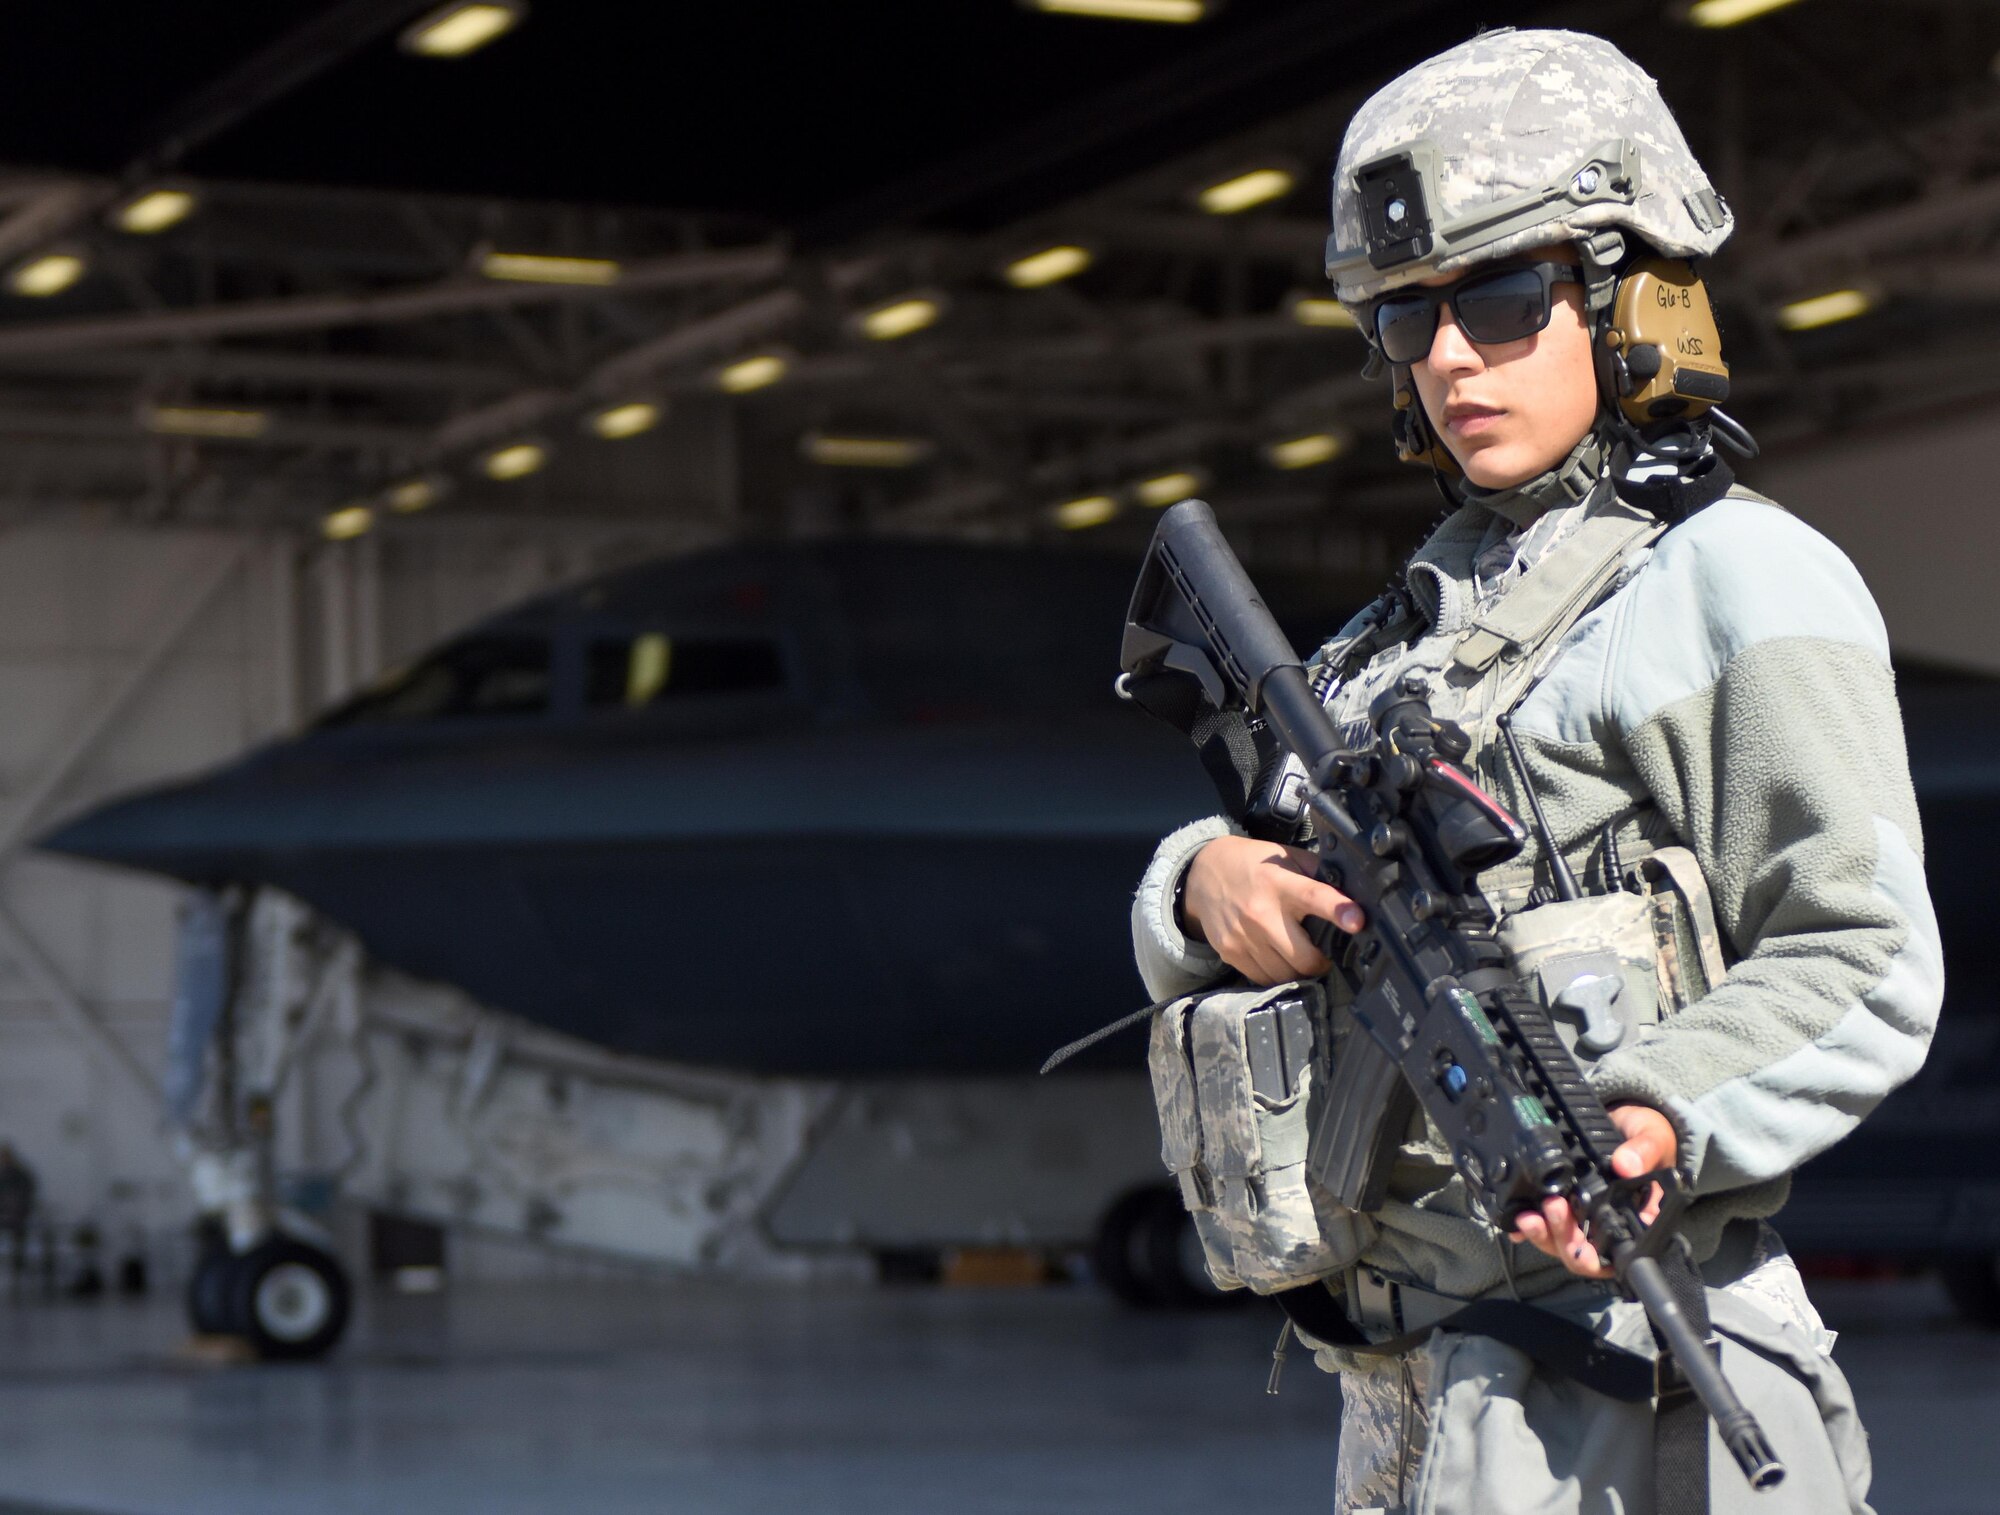 U.S. Air Force Airman 1st Class Carolina Santana, a security forces response member from the 509th Security Forces Squadron, provides security during Exercise Global Thunder 17 (GT17) at Whiteman Air Force Base, Mo., Oct. 27, 2016. GT17 provides training opportunities and exercise scenarios for all U.S. Strategic Command mission areas, with a specific focus on strategic readiness. (U.S. Air Force photo by Senior Airman Joel Pfiester) 